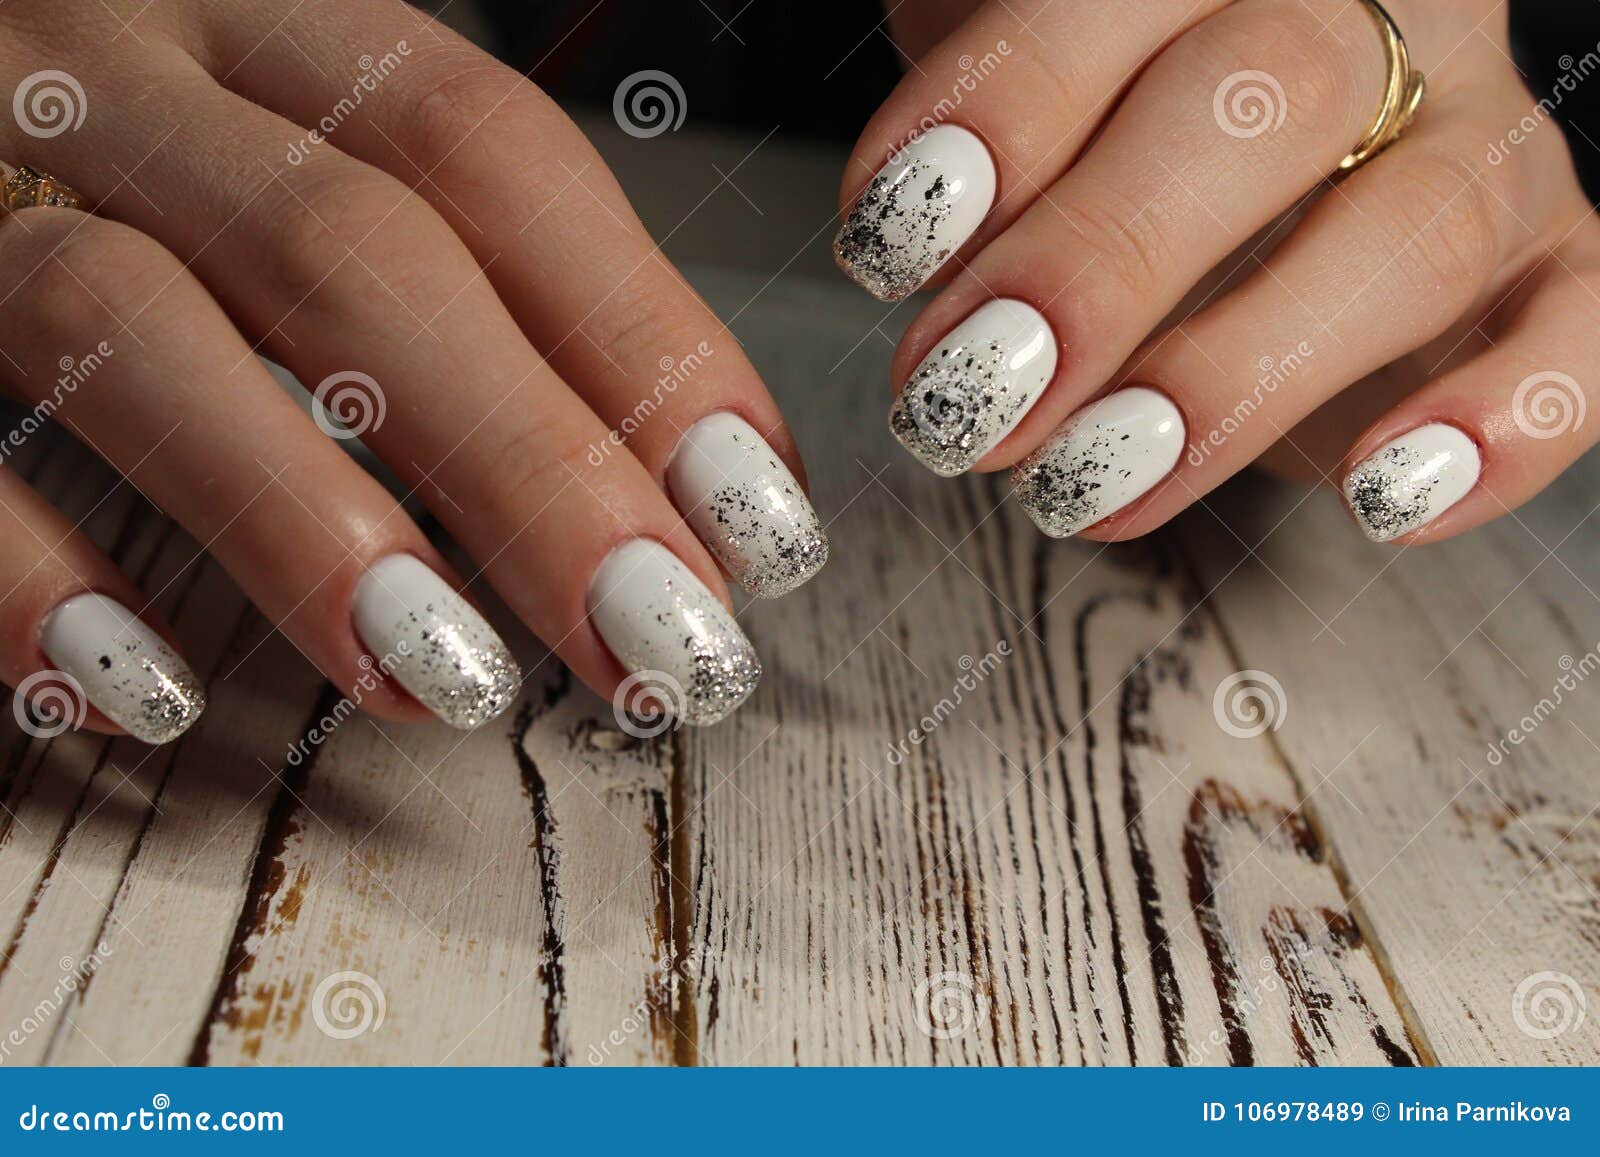 Beautiful Female Hands with White Nails Stock Image - Image of design ...